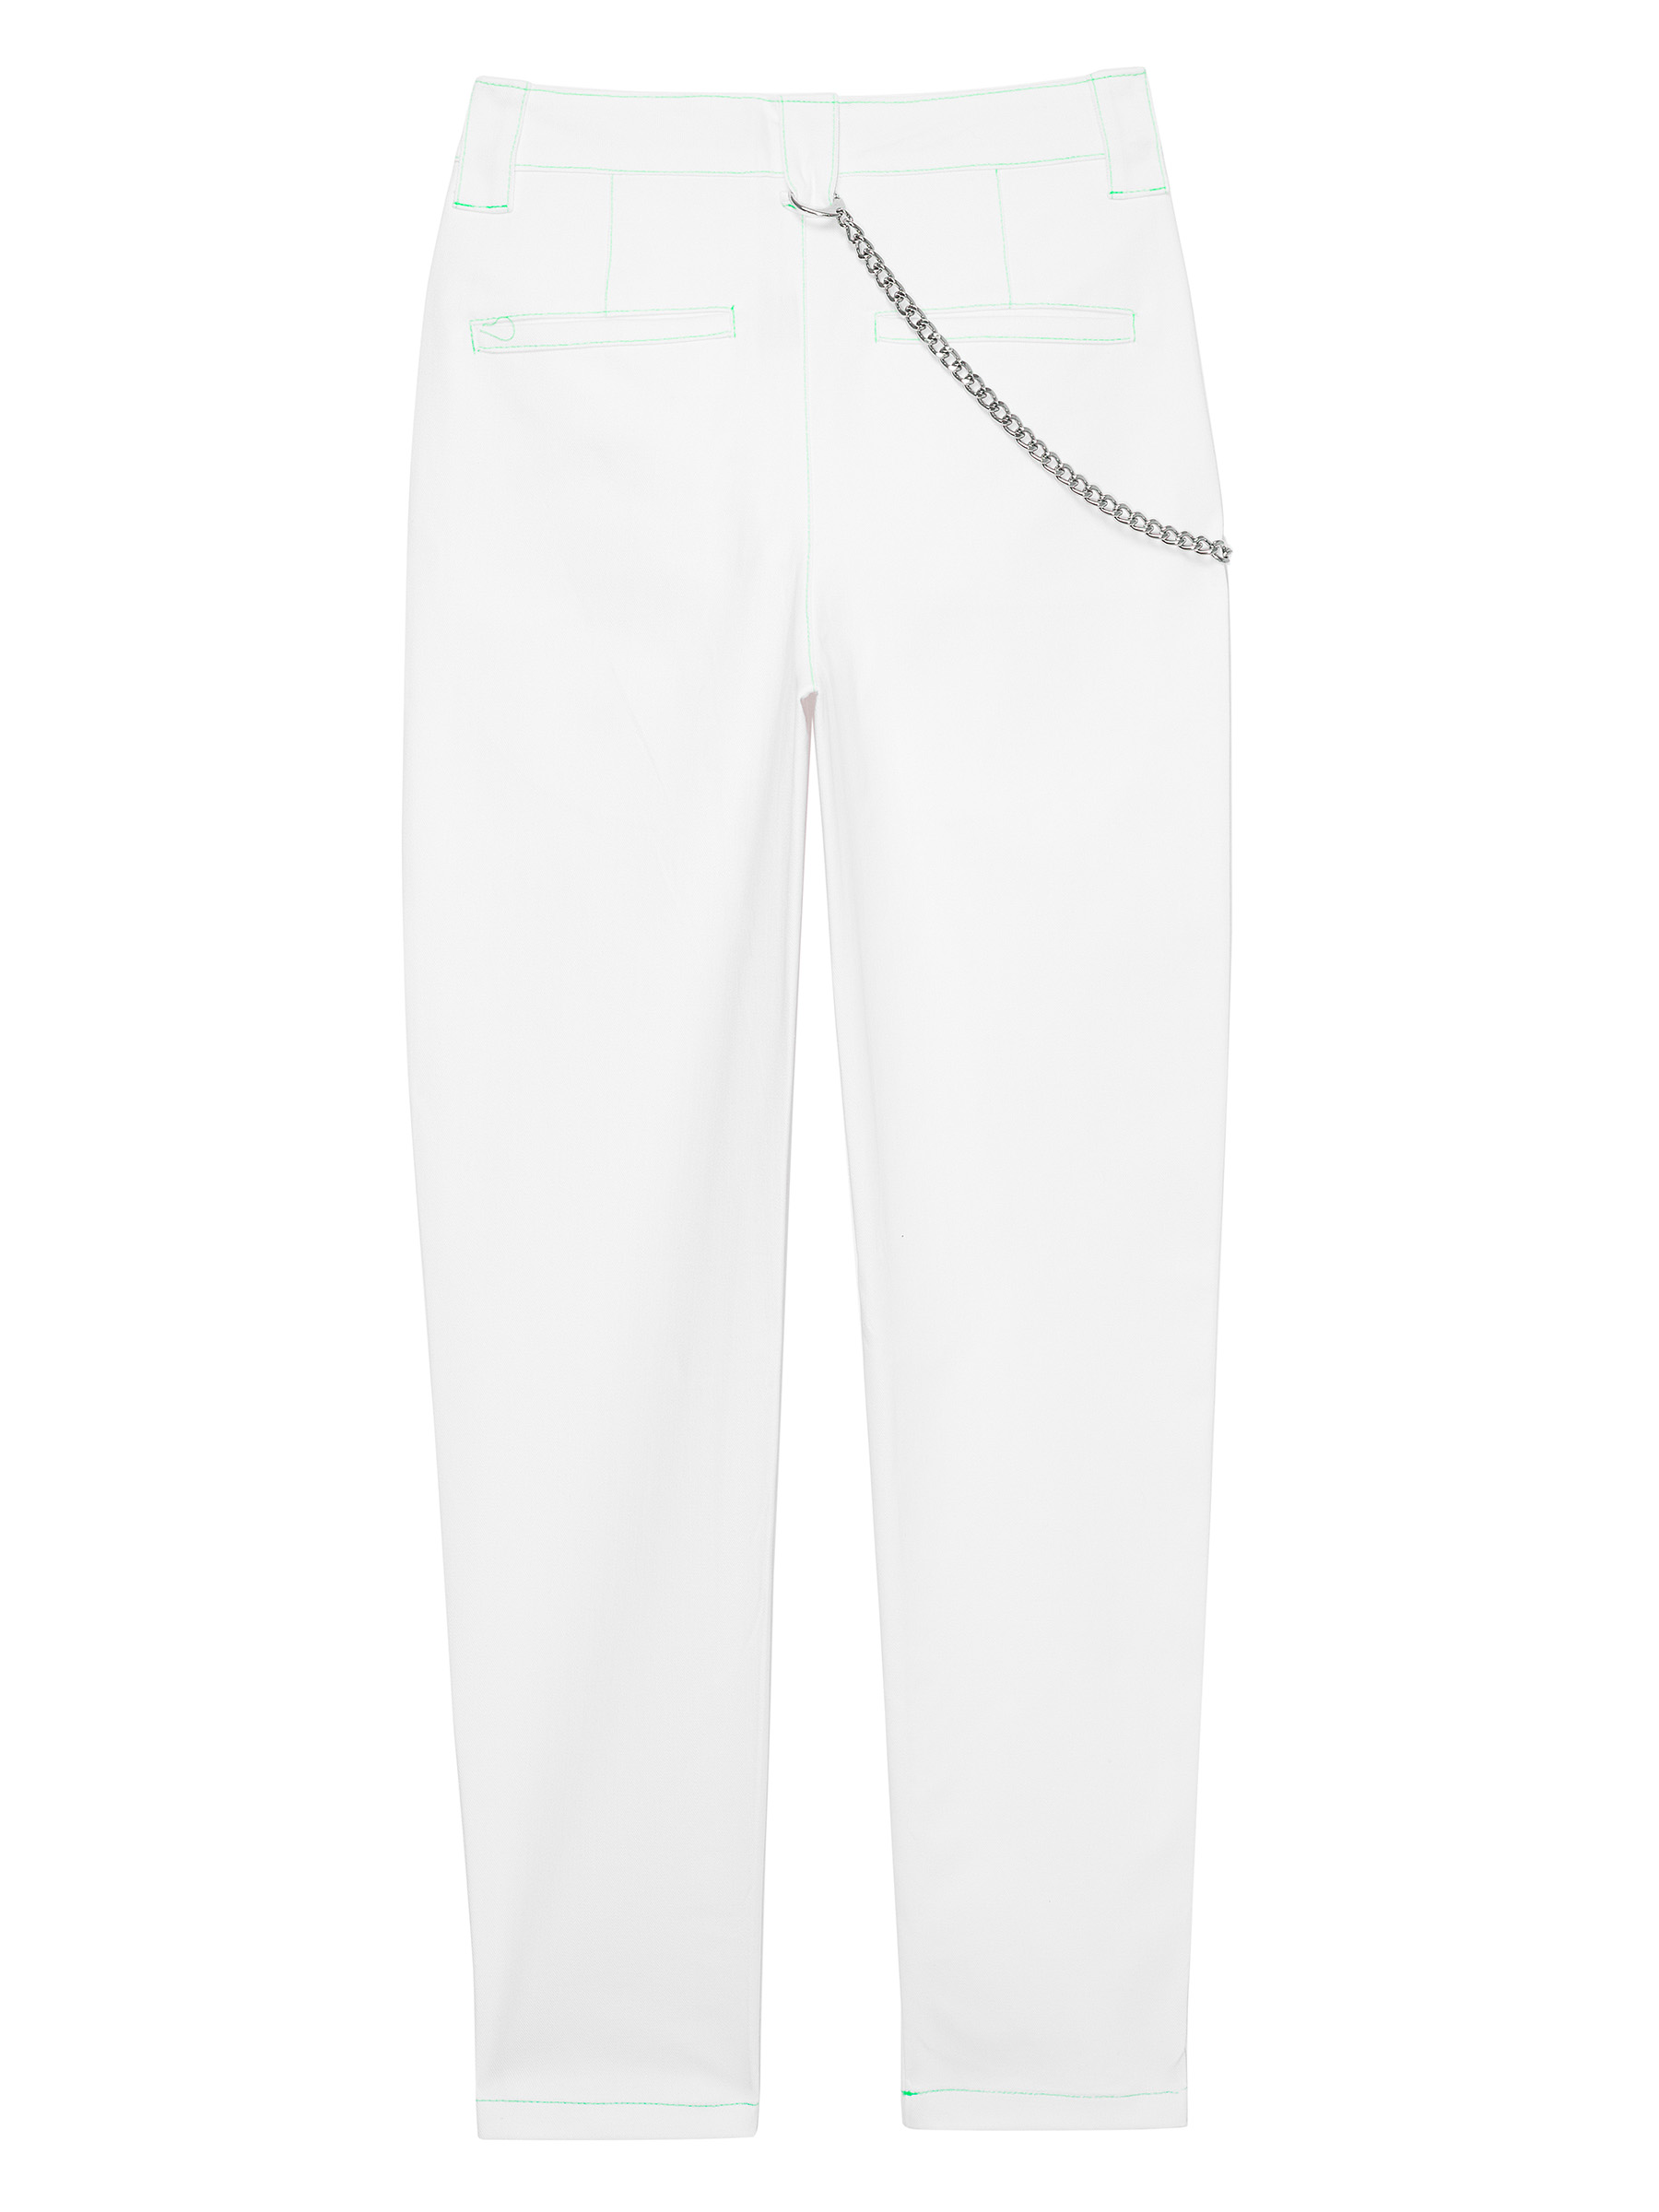 LH WHITE PANTS WITH NEON SEAMS 